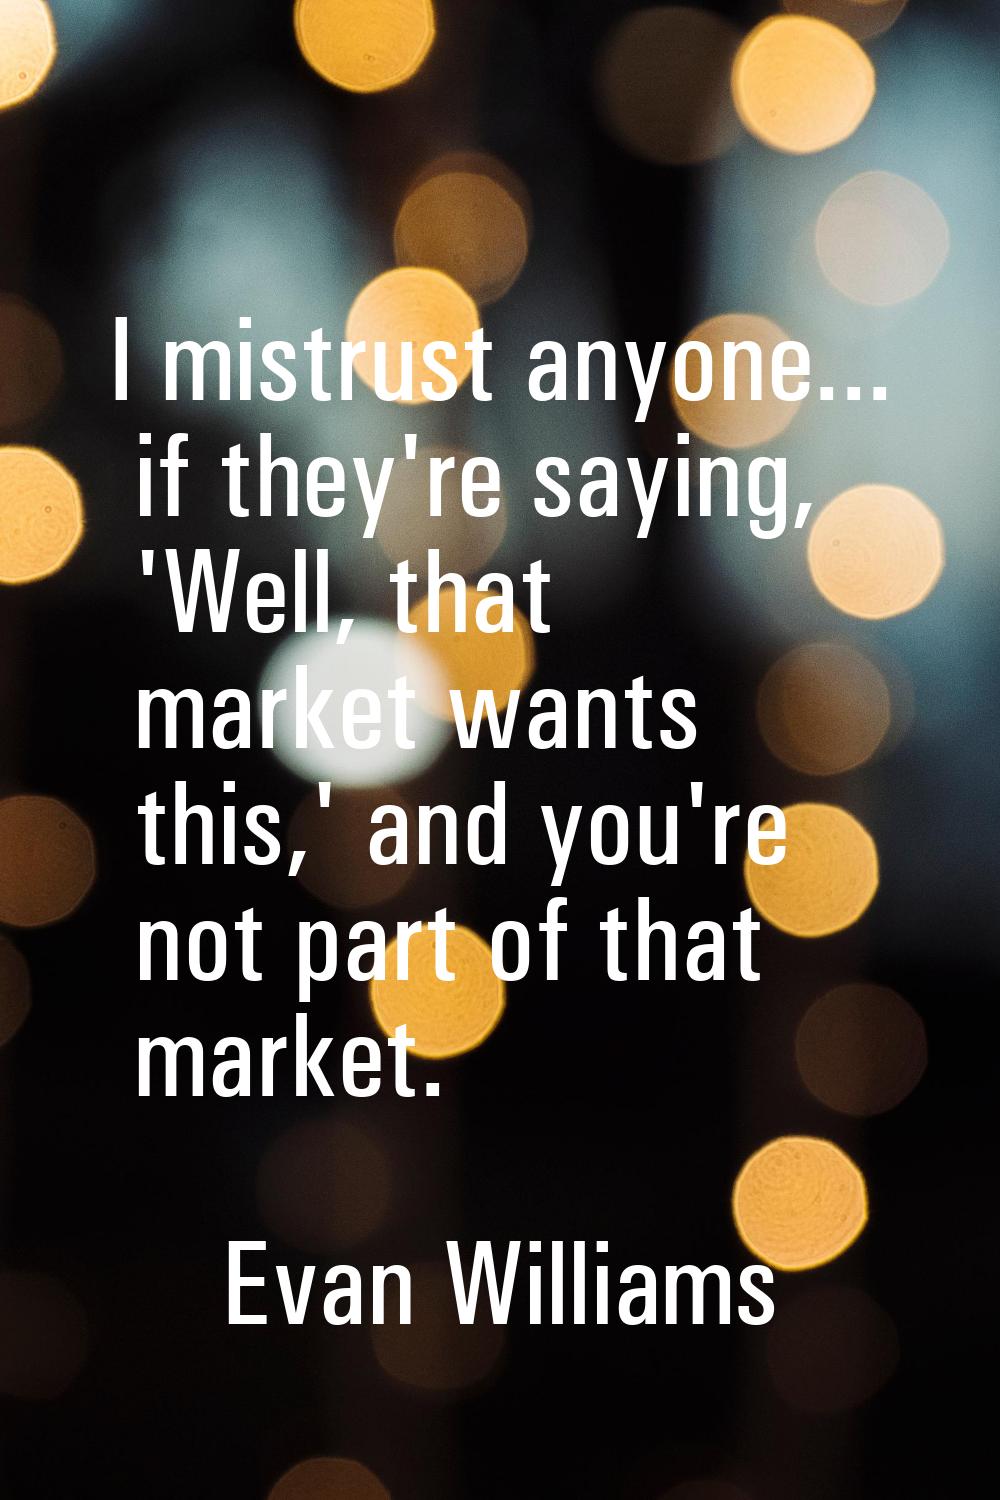 I mistrust anyone... if they're saying, 'Well, that market wants this,' and you're not part of that